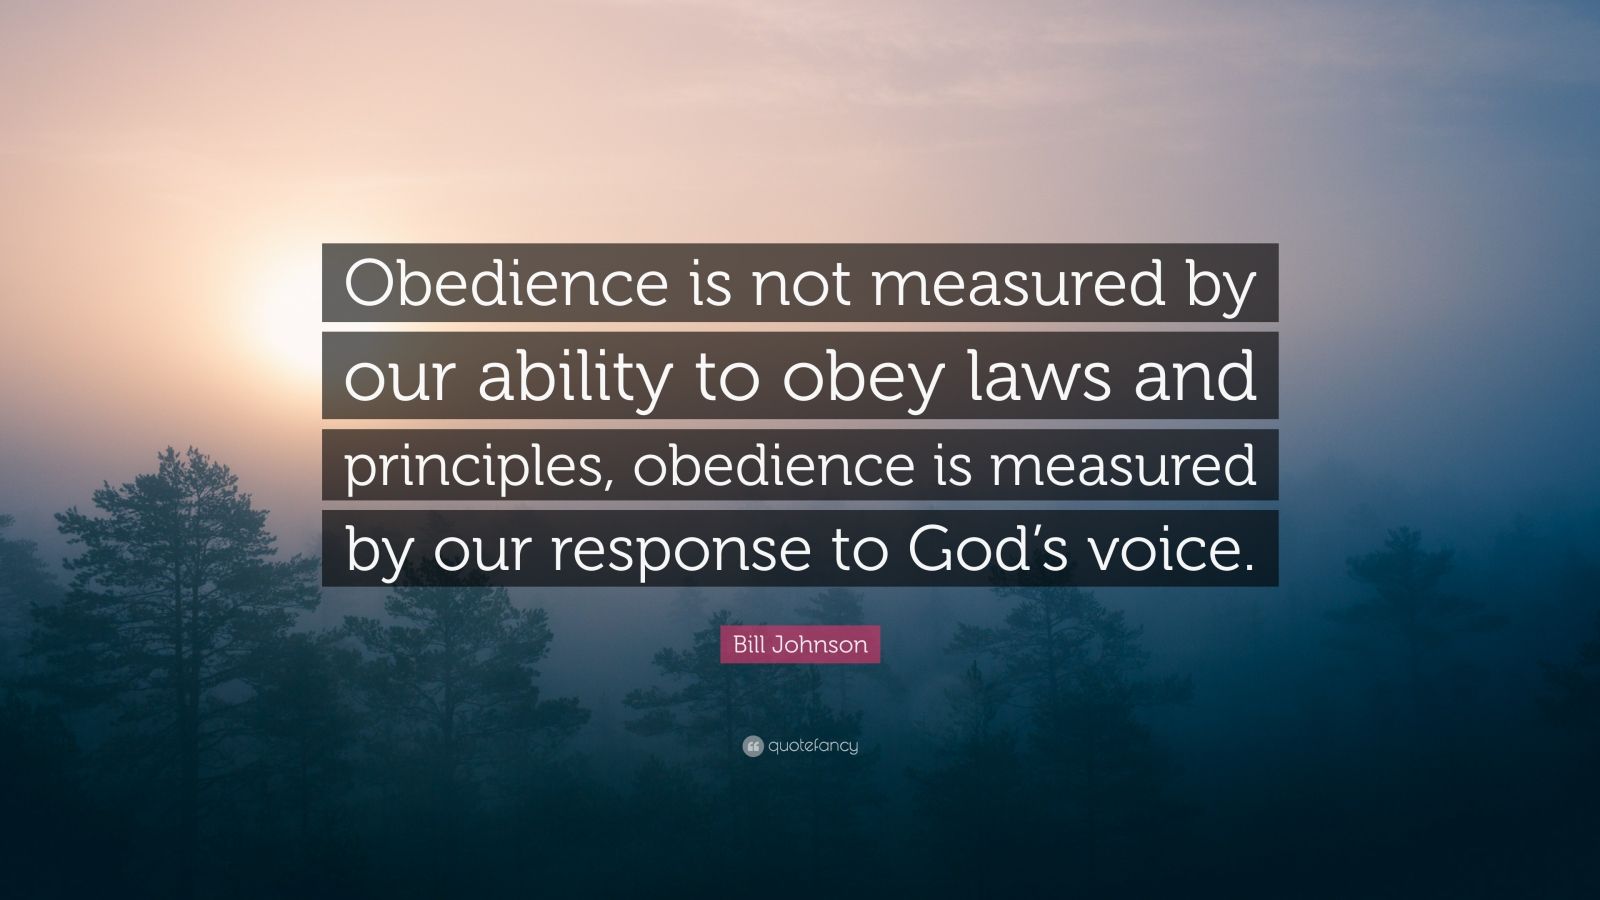 Bill Johnson Quote: “Obedience is not measured by our ability to obey